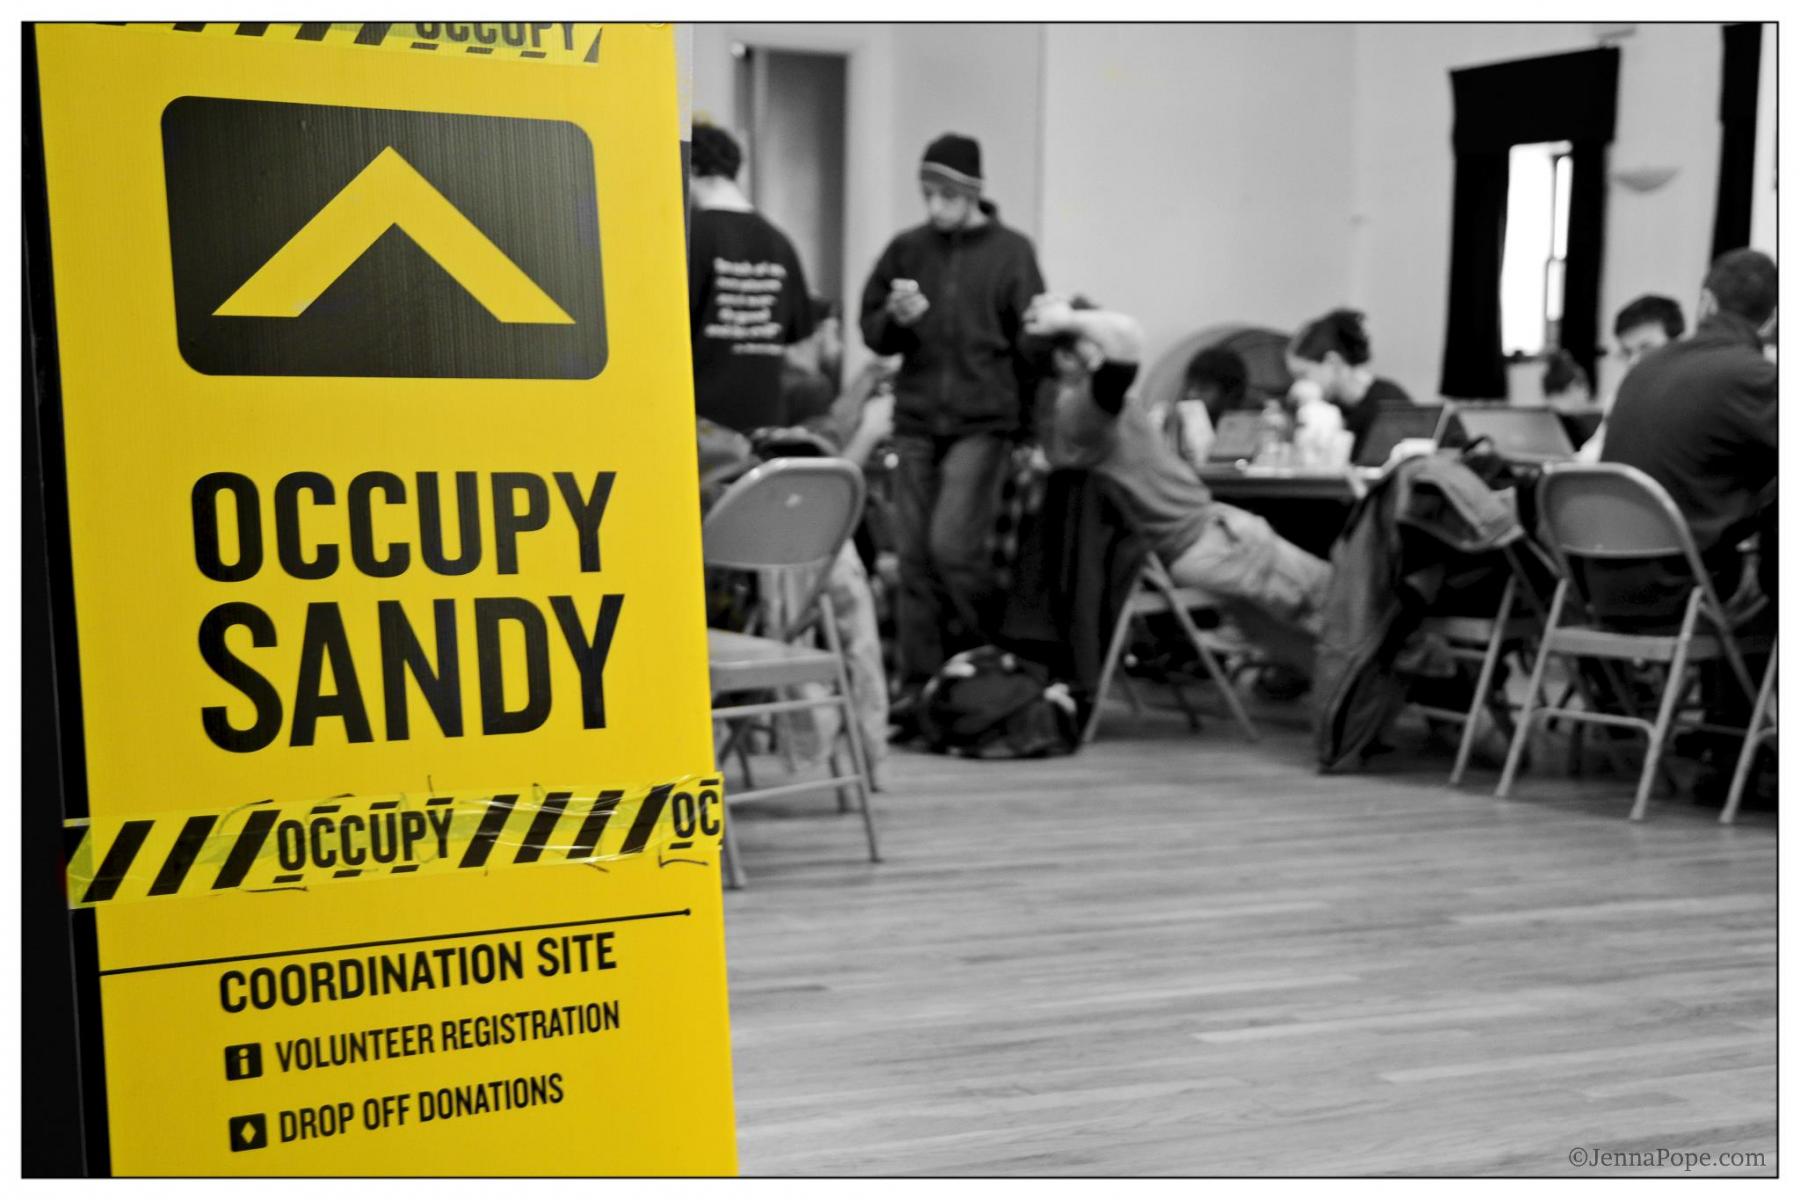 Occupy Sandy was the citizens’ response to hurricane Sandy